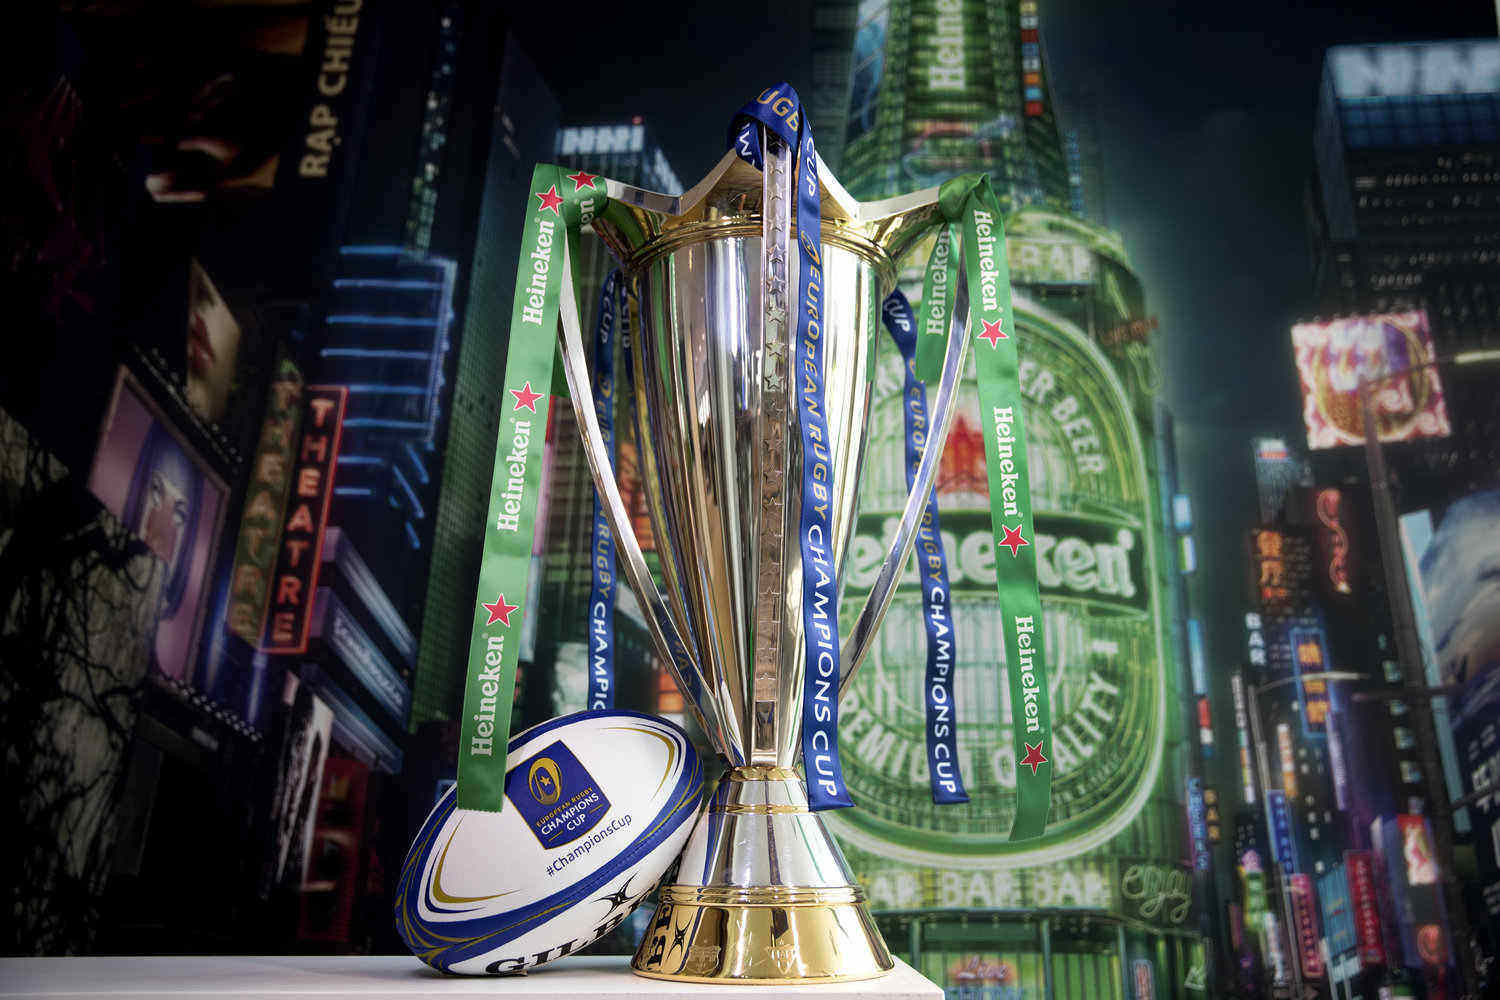 The new four-year agreement with European Professional Club Rugby will see Heineken once again become the main partner of rugby’s leading European club tournament.